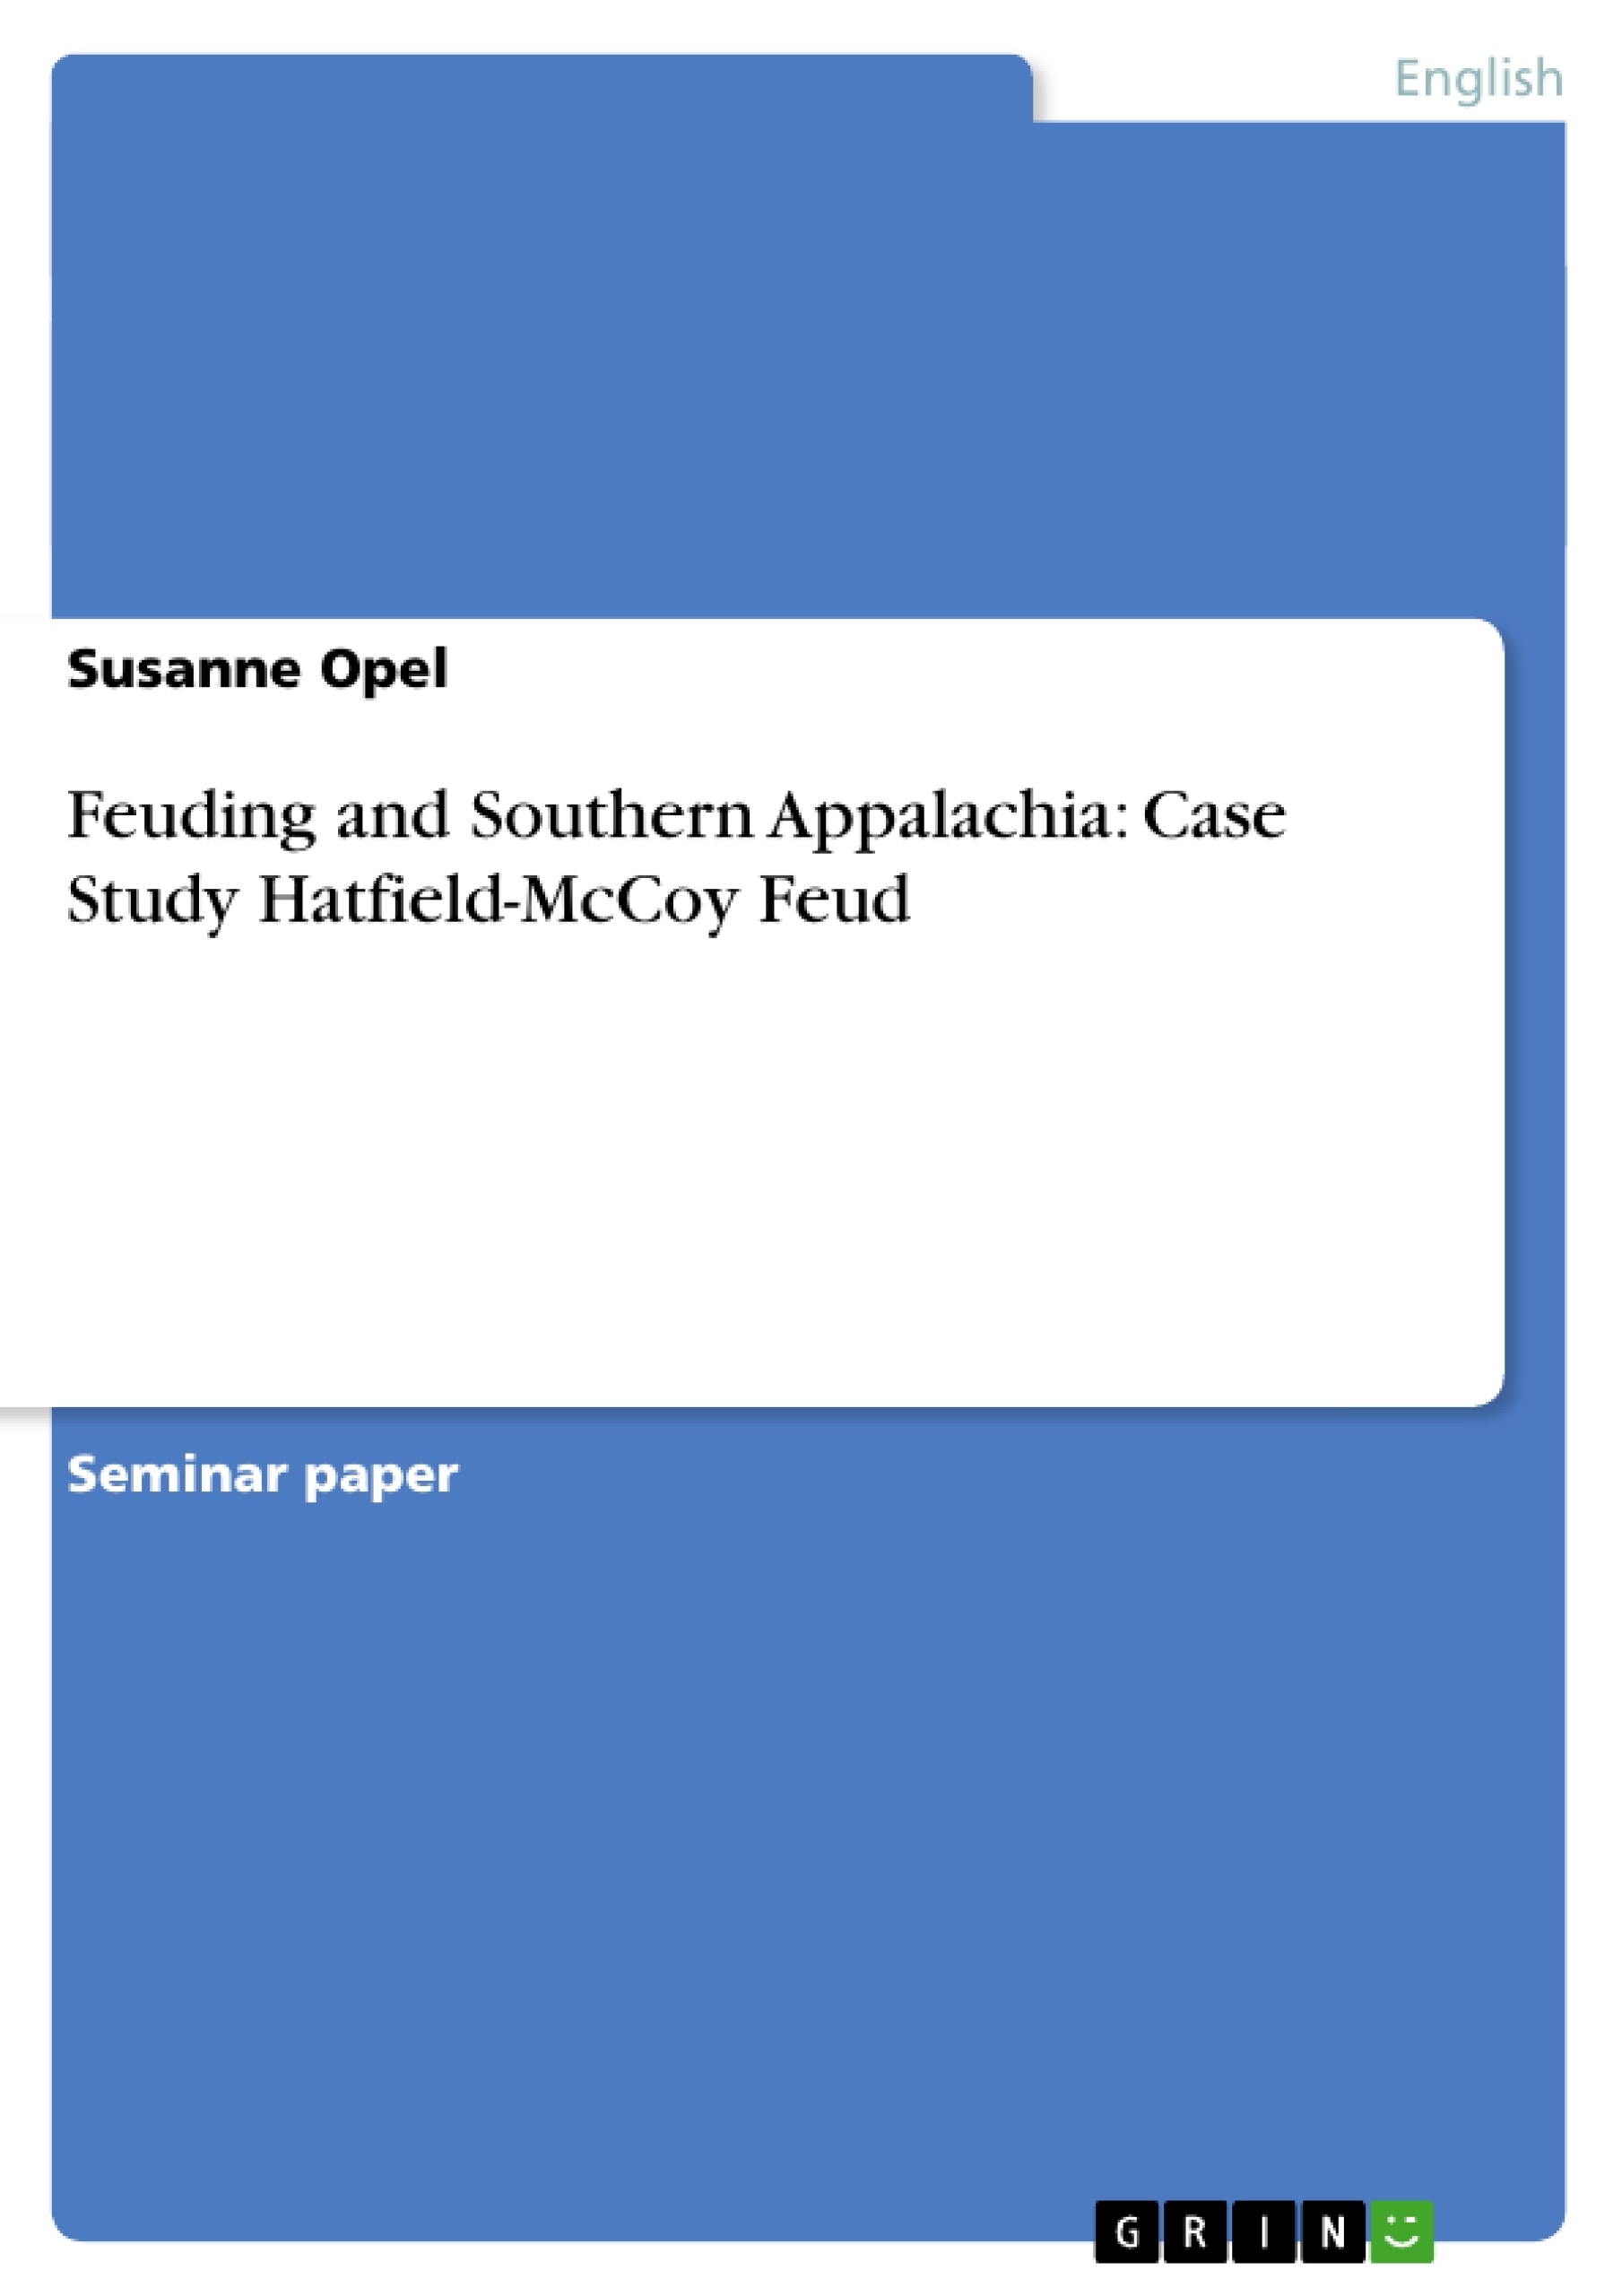 Titre: Feuding and Southern Appalachia: Case Study Hatfield-McCoy Feud